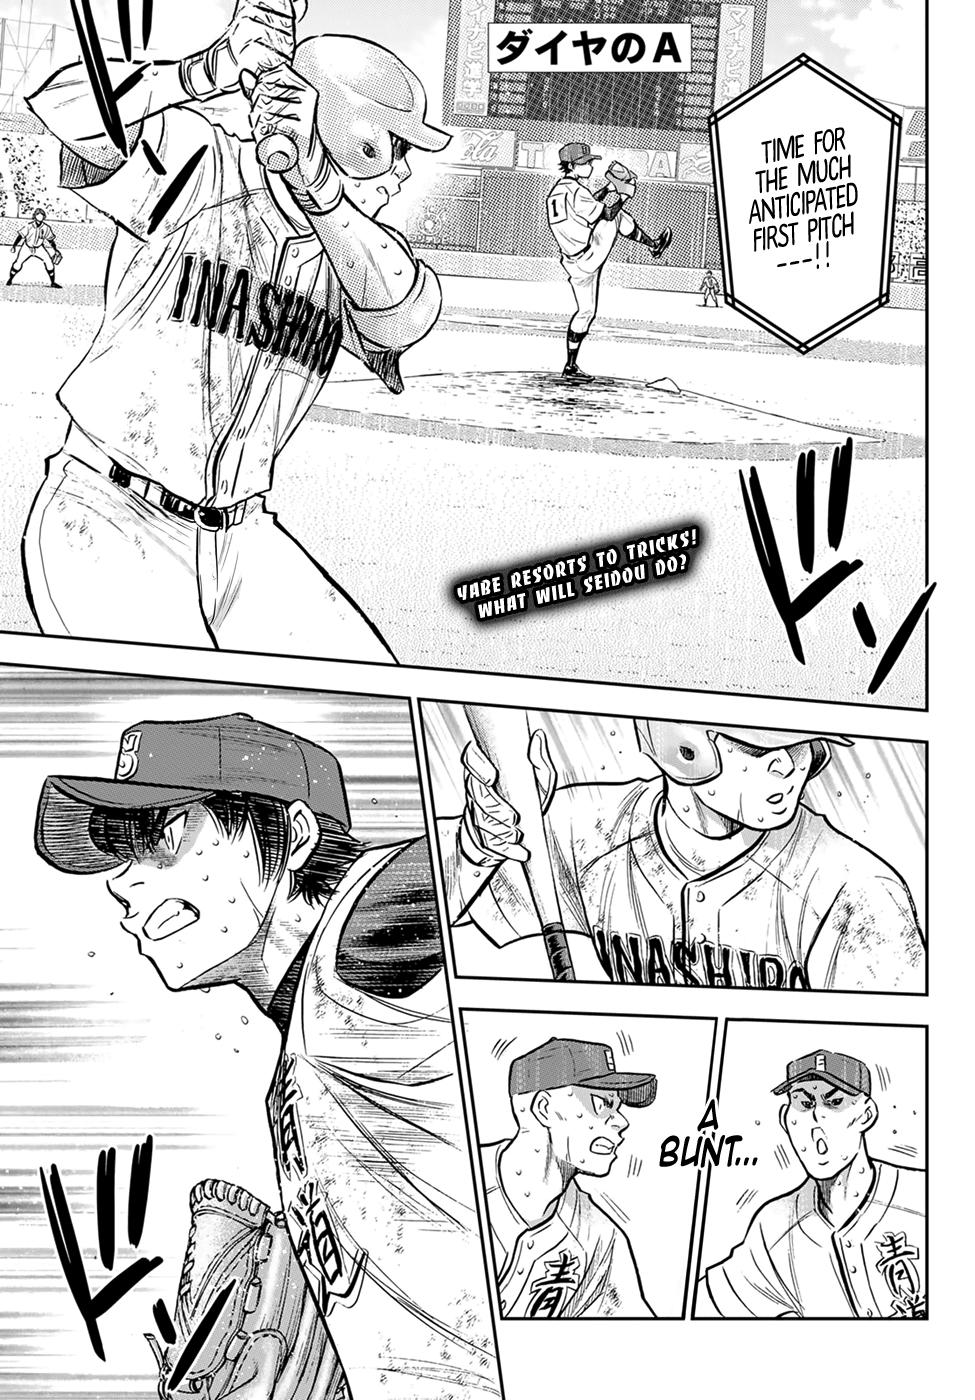 Read Daiya No A - Act Ii Chapter 308: Ace Of The Diamond [End